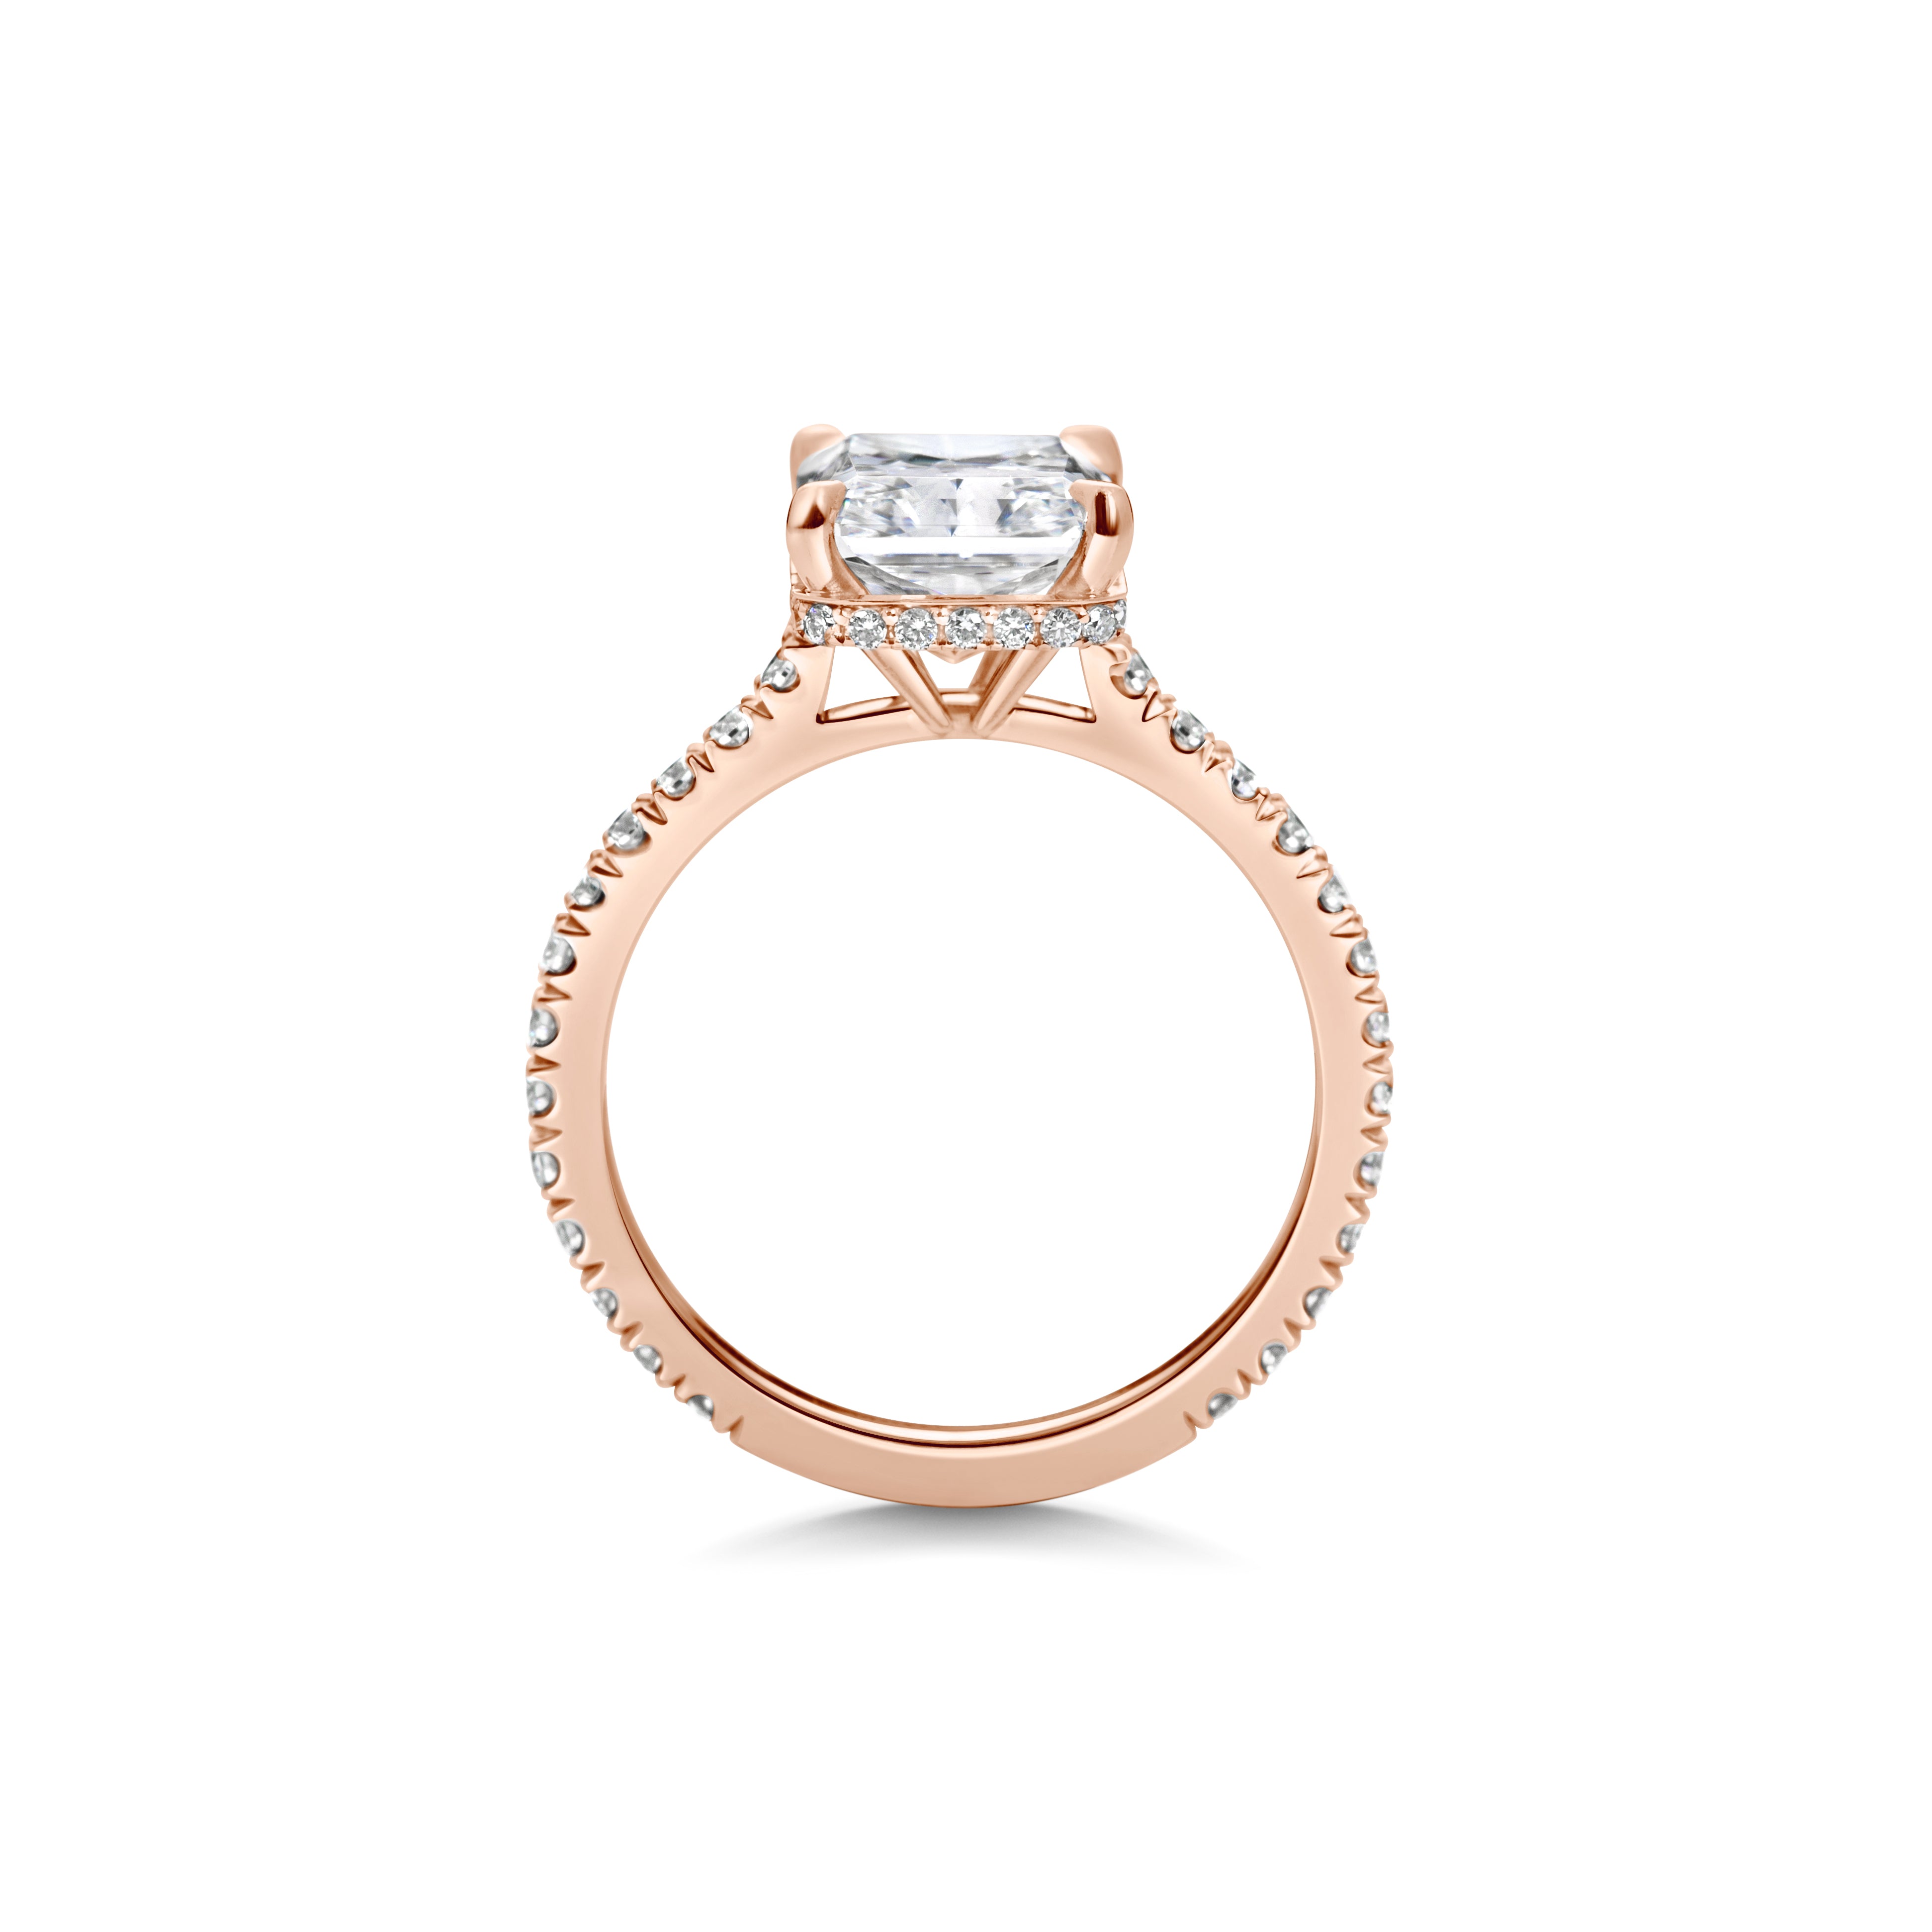 LOULOU radiant cut rose gold